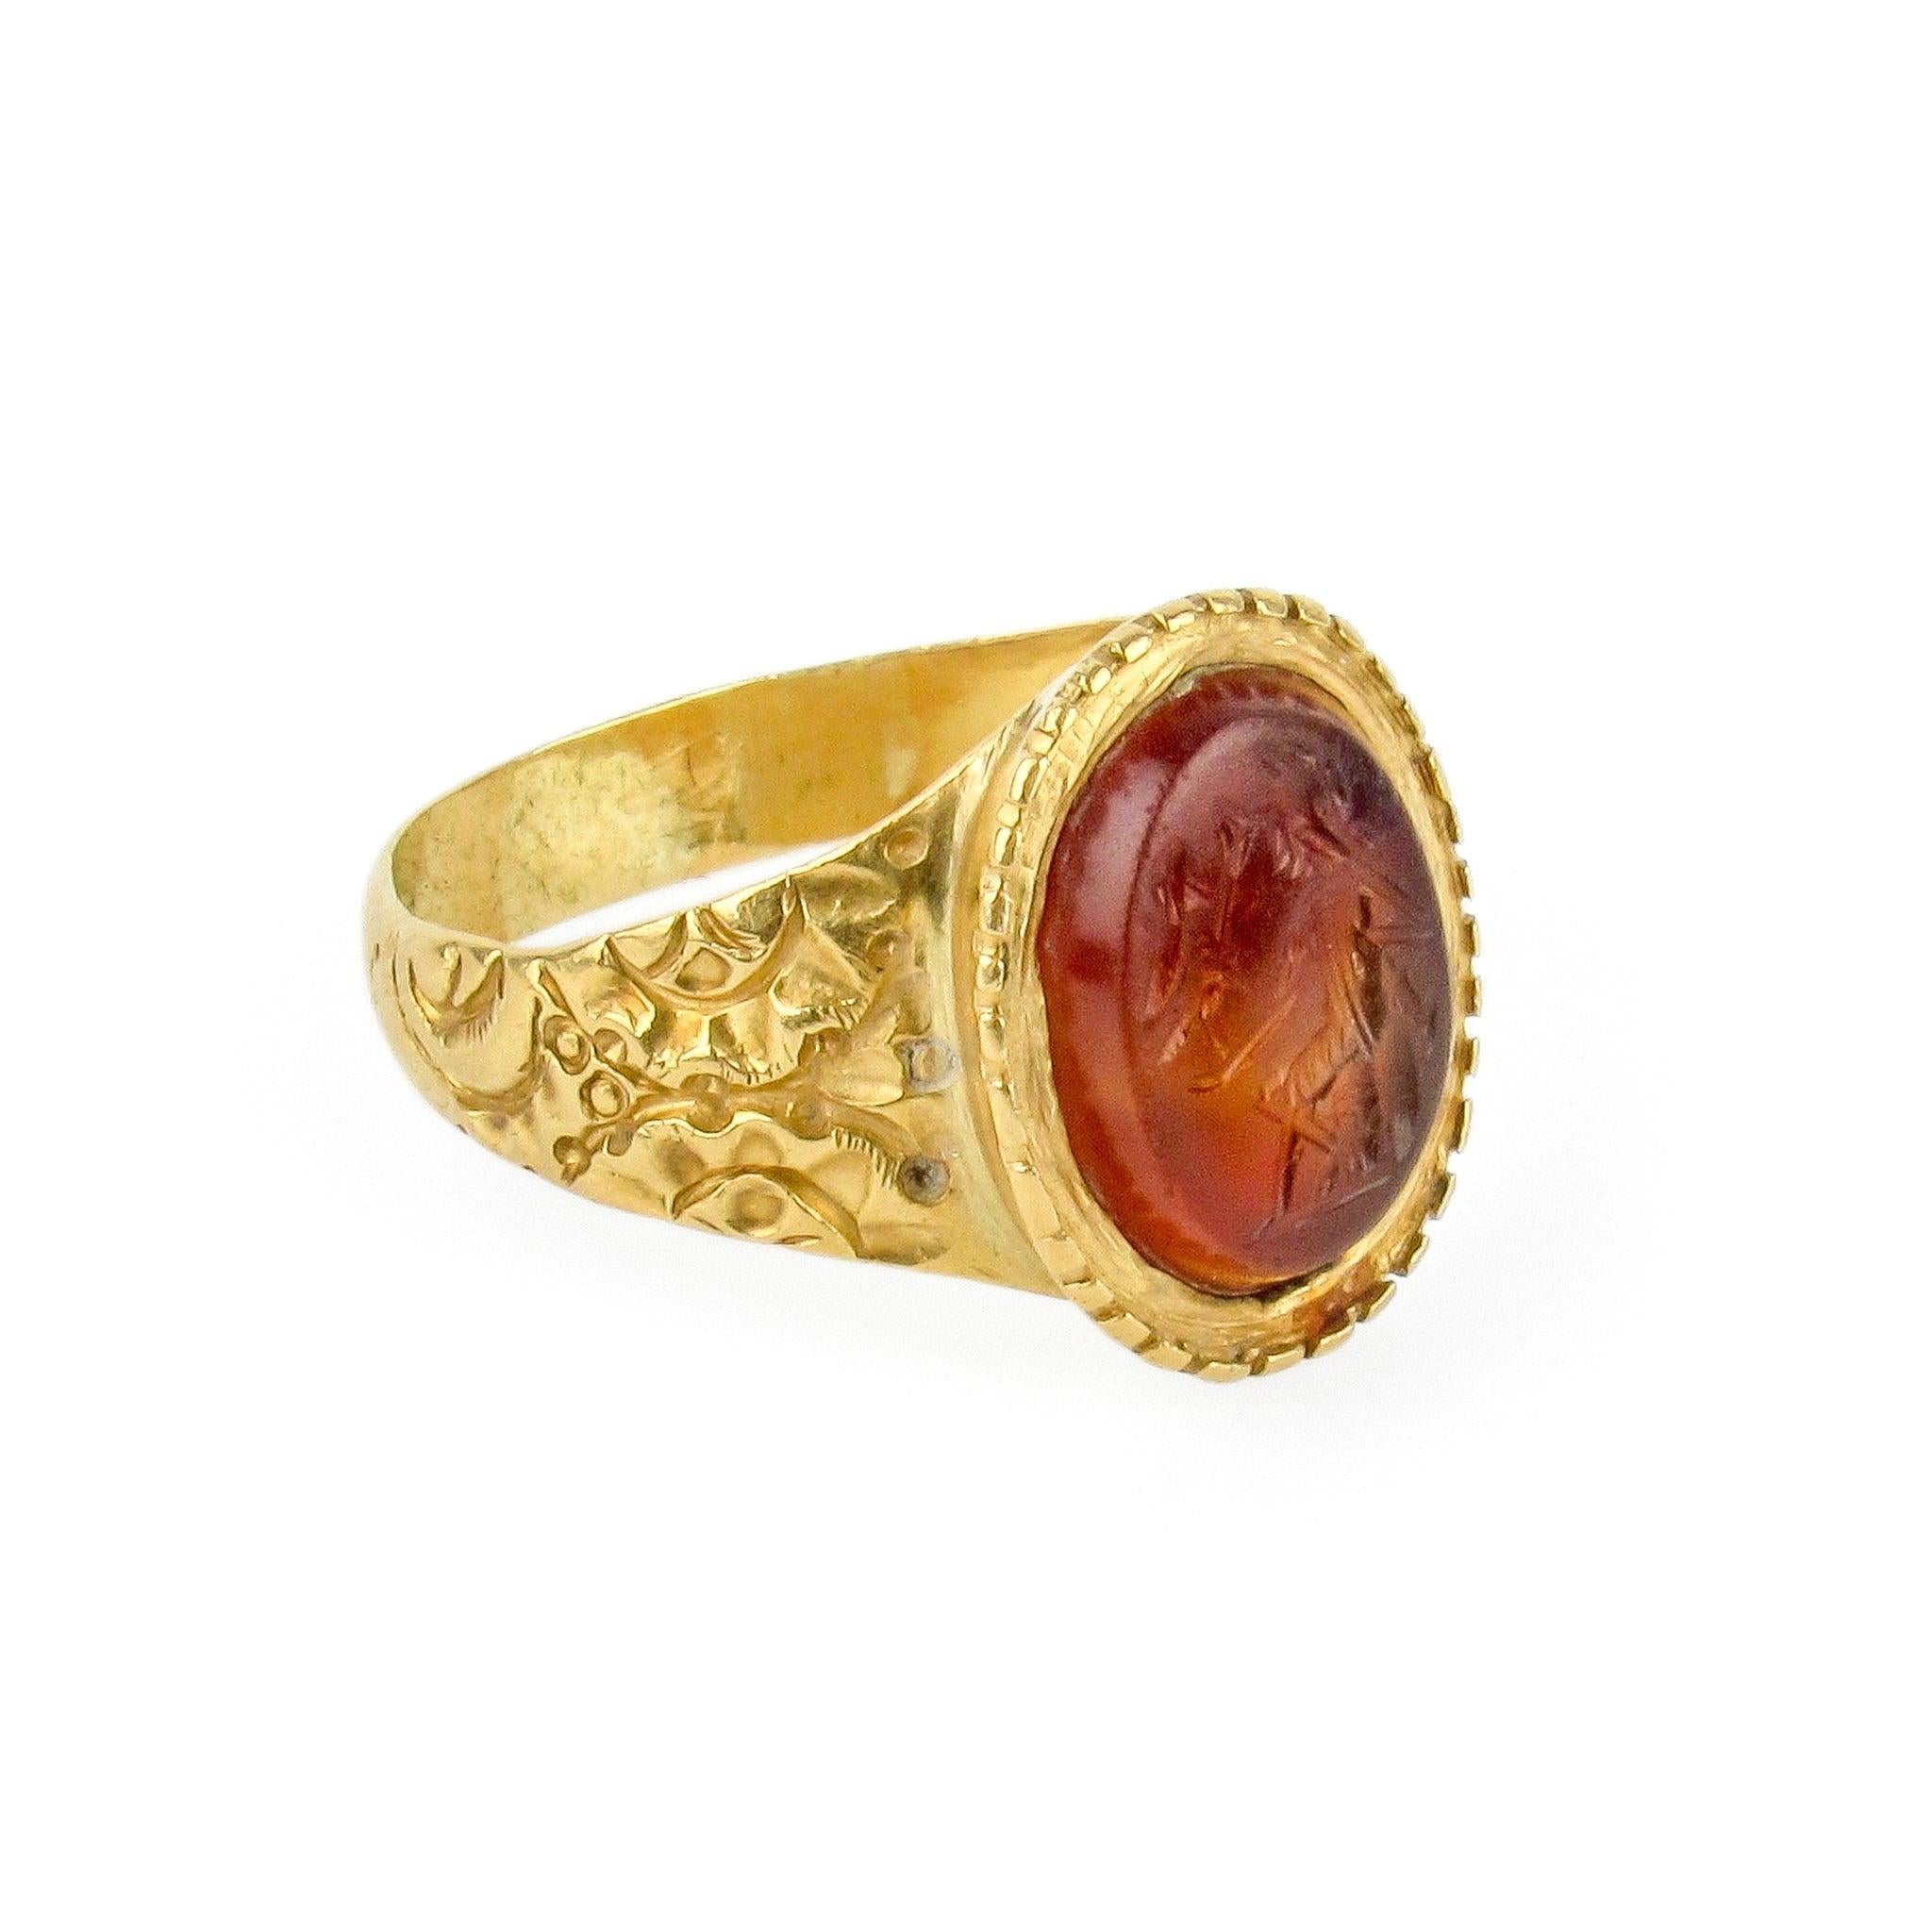 Early 22k Carnelian Intaglio Ring of Jupiter Holding Victory In Good Condition For Sale In Hummelstown, PA